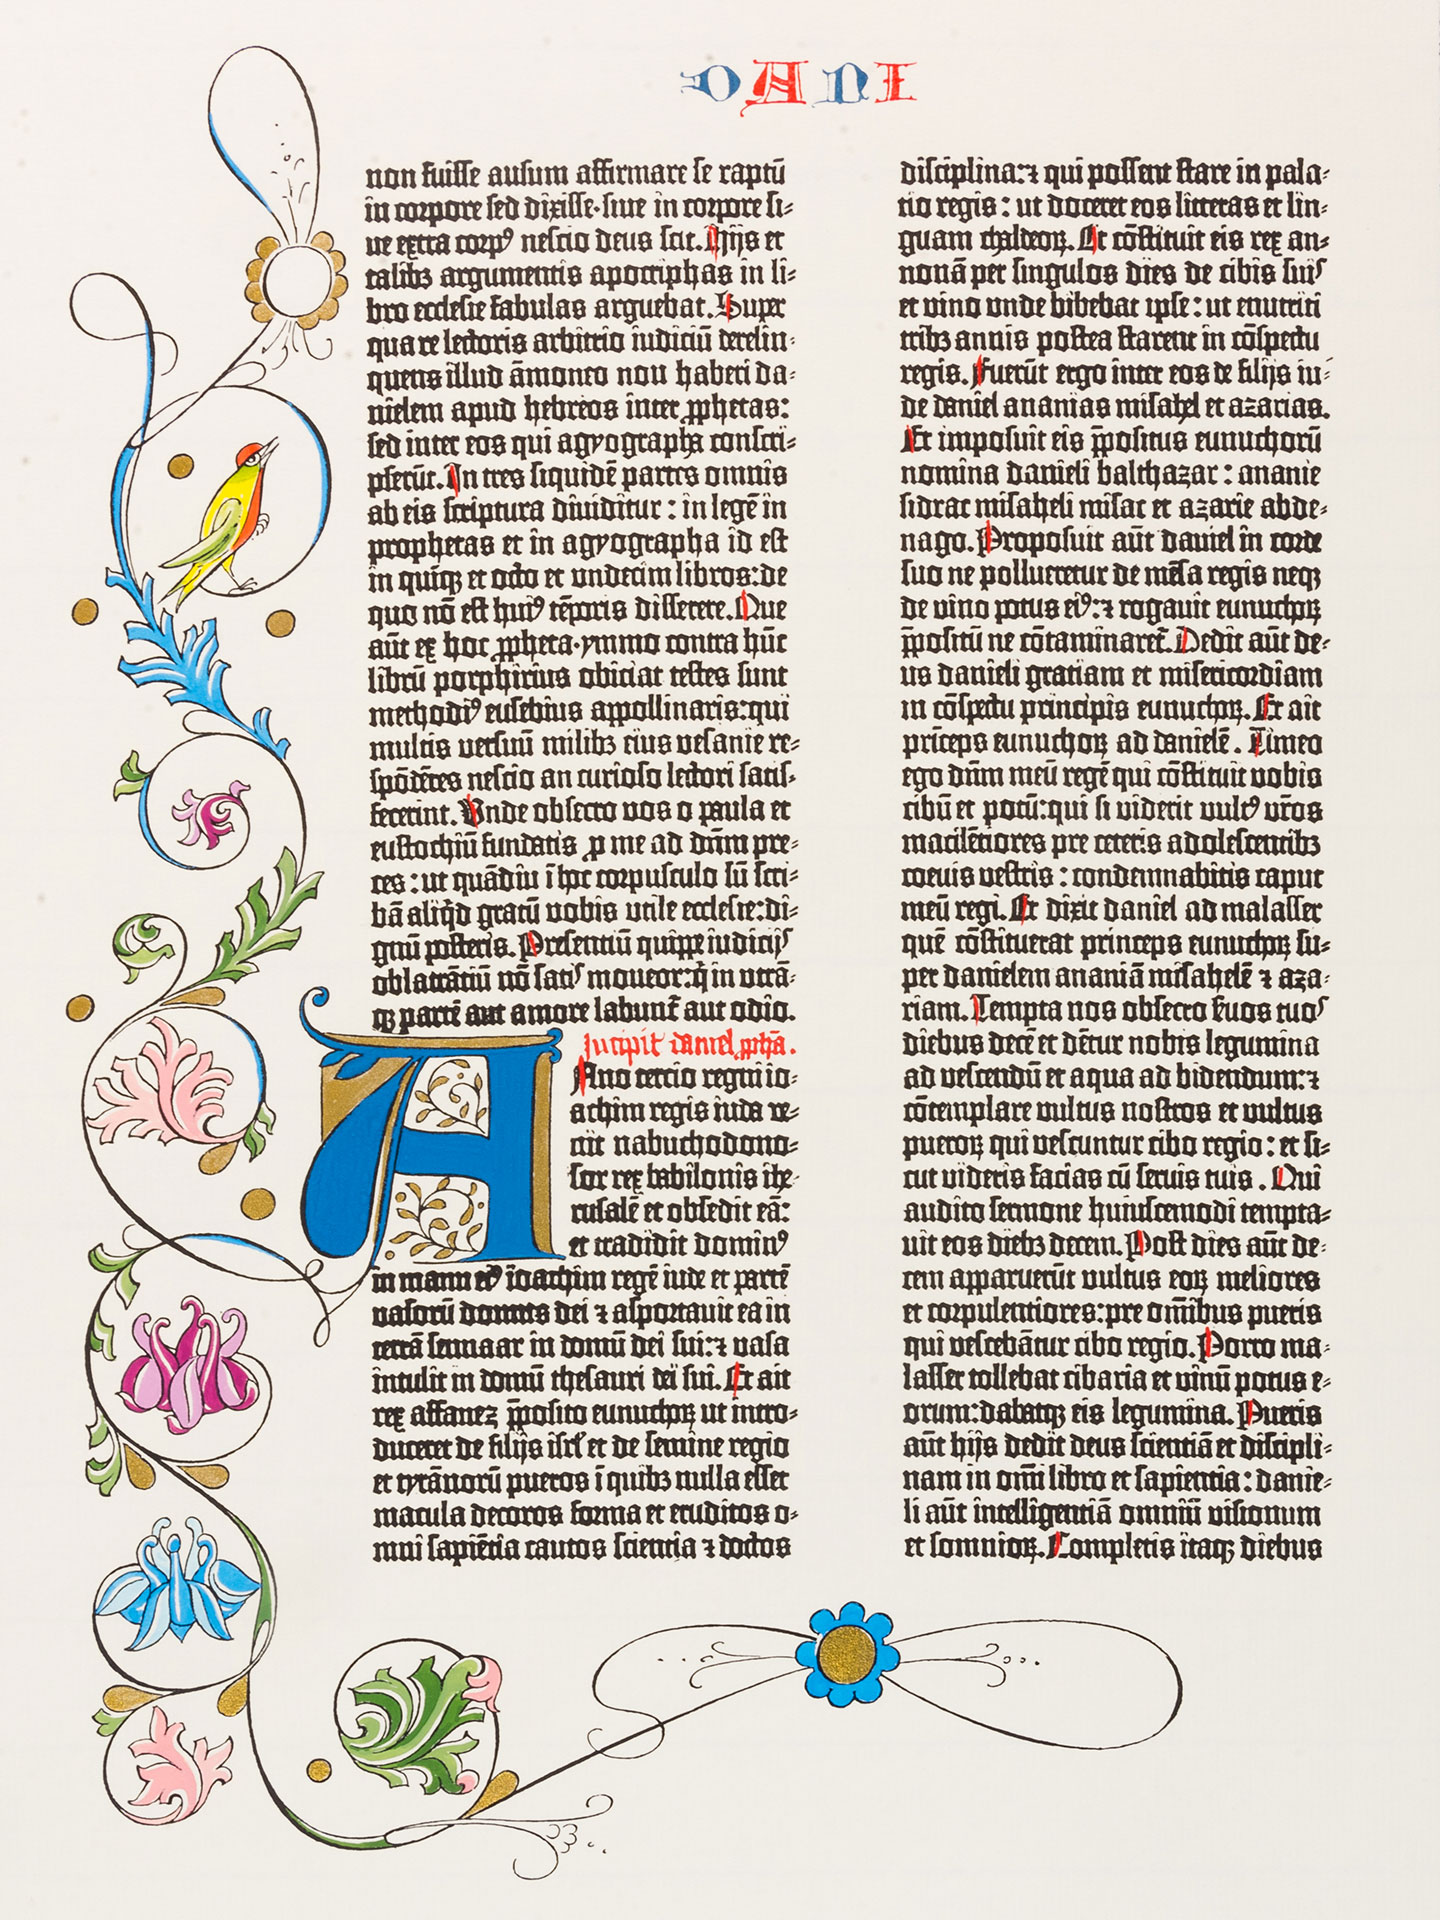 The Book of Daniel. Press print from the Gutenberg Bible